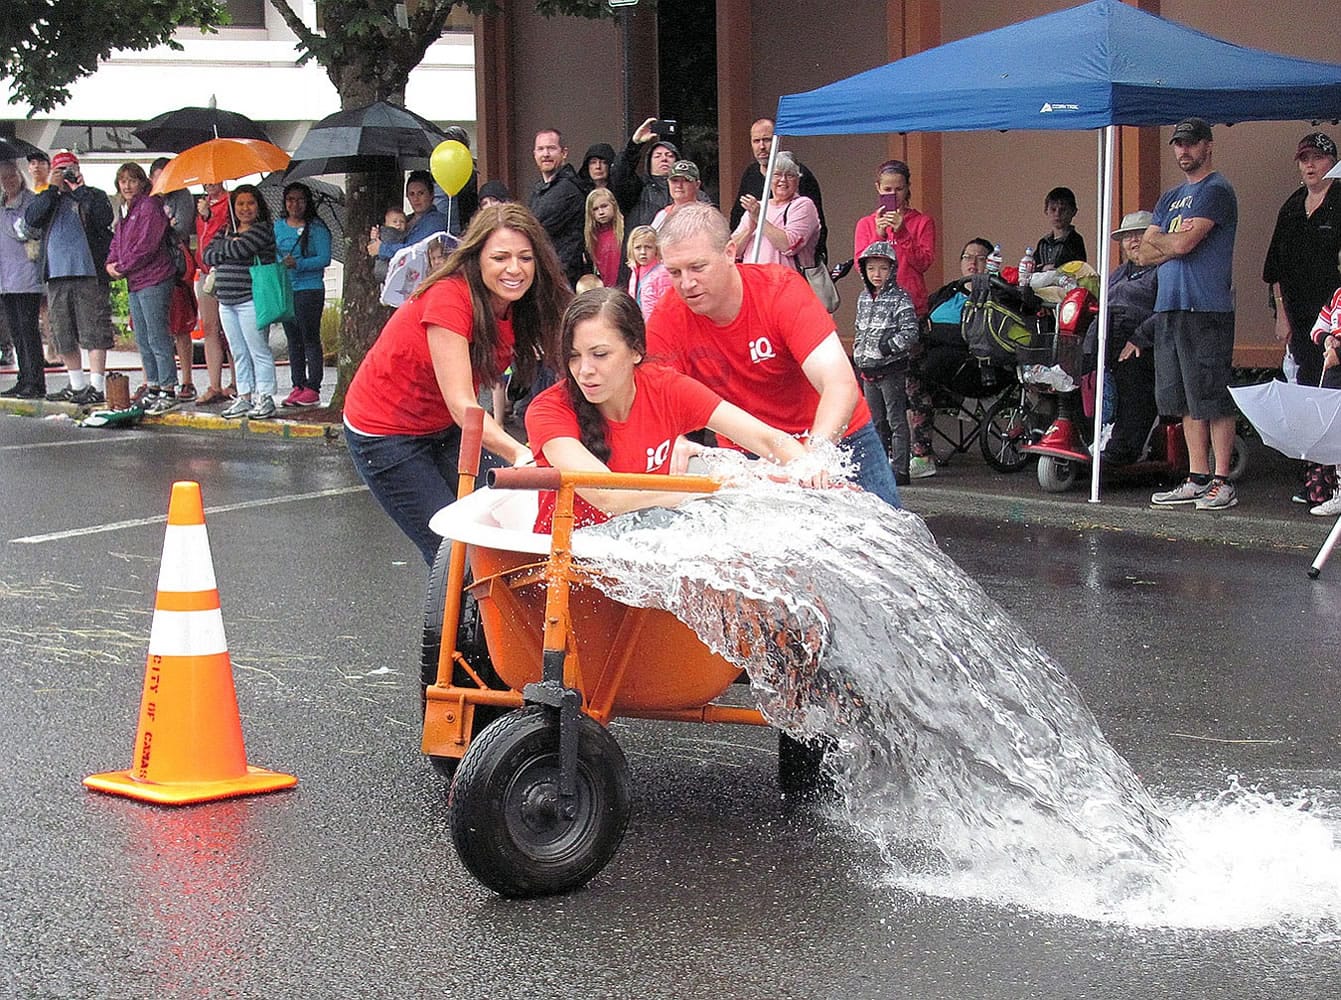 After its first bathtub came apart, the iQ Credit Union team posted a time of 14.81 seconds on the race course in downtown Camas.